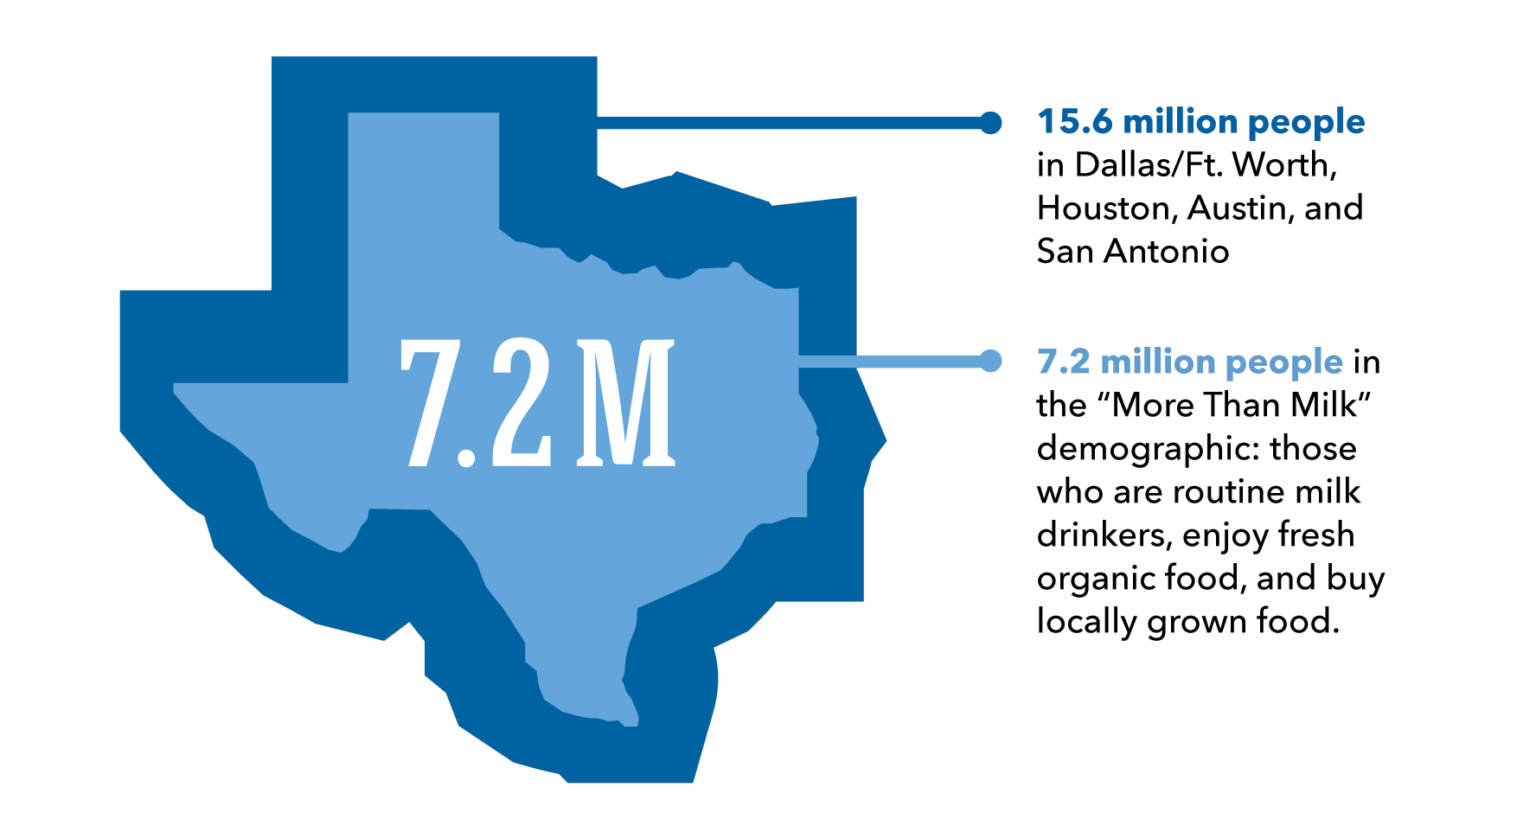 Infographic of Texas - 15.6 Million People in Dallas/Ft.Worth, Houston, Austin, and San Antonio 7.2 Million people in the "More Than Milk" demographic: those who are routine milk drinkers, enjoy fresh organic food, and buy locally grown food.